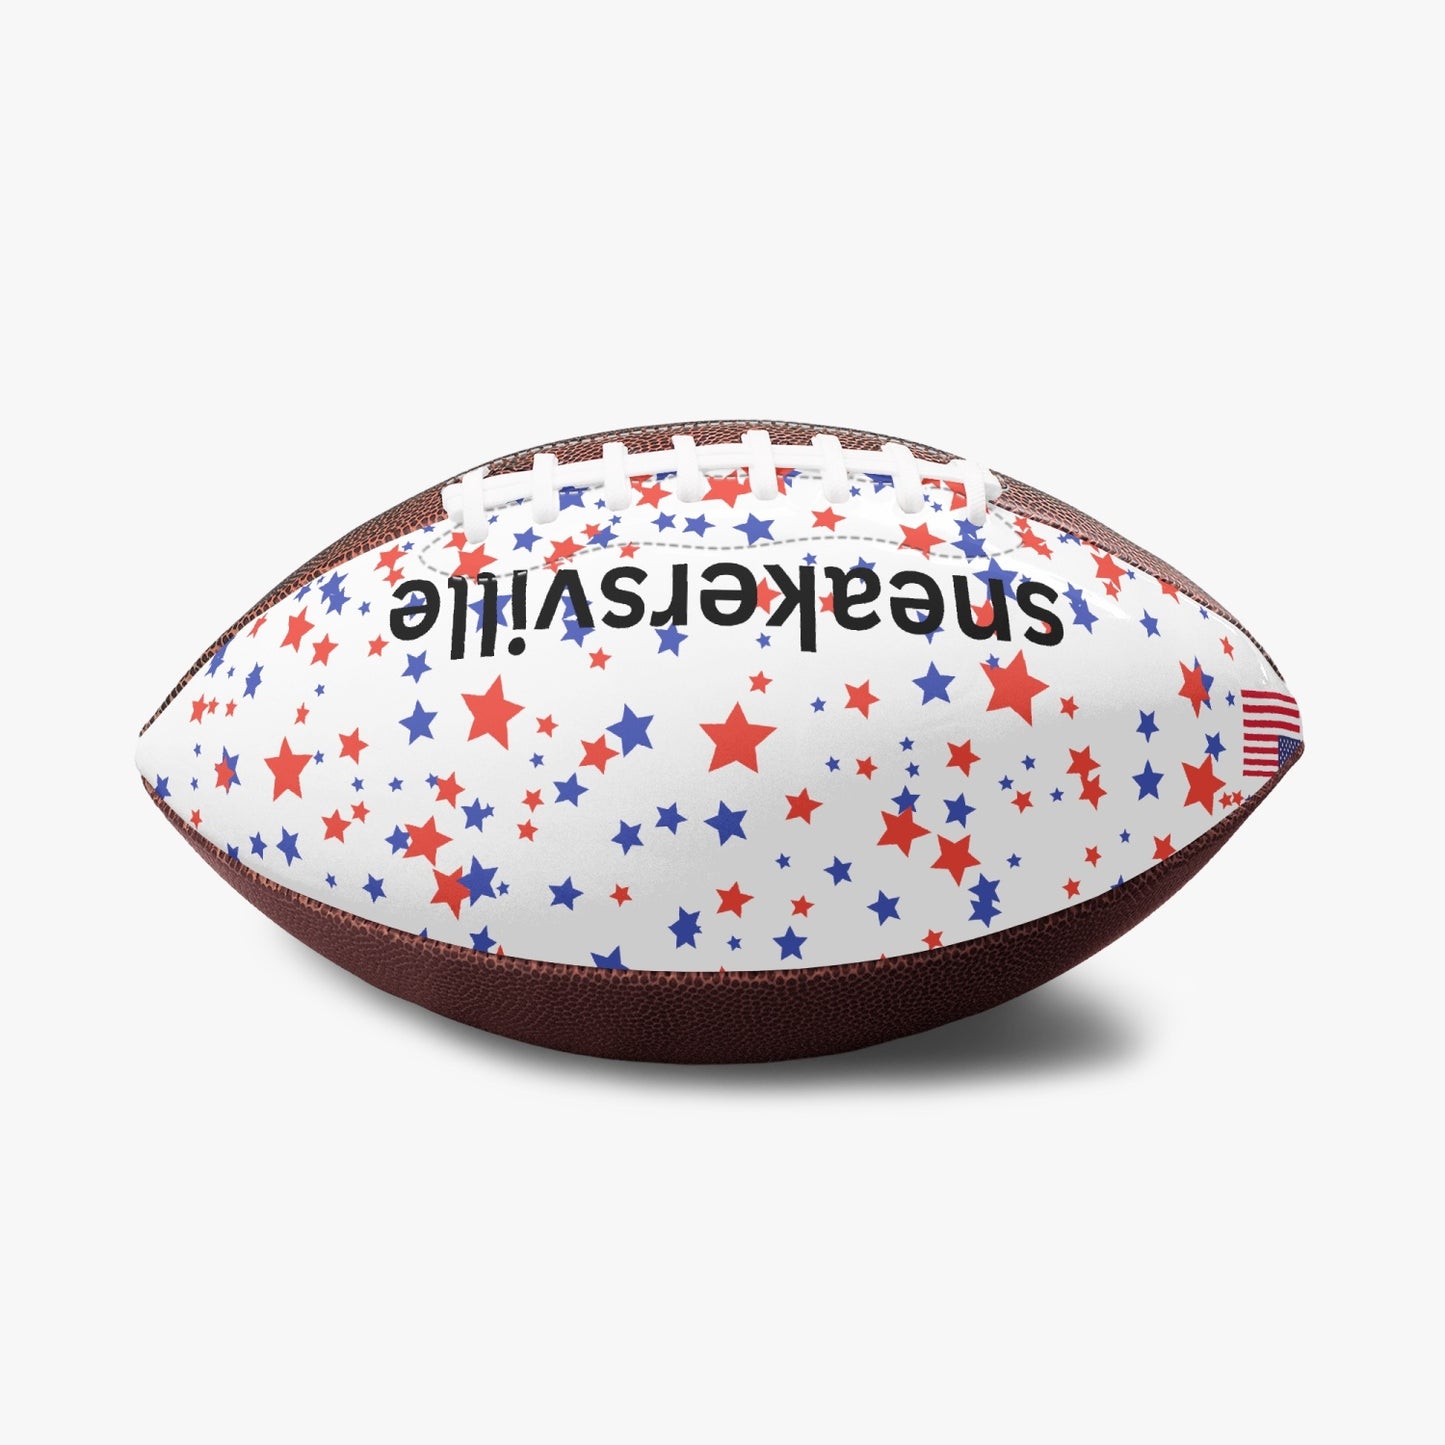 Official NFL size Football - USA Stars